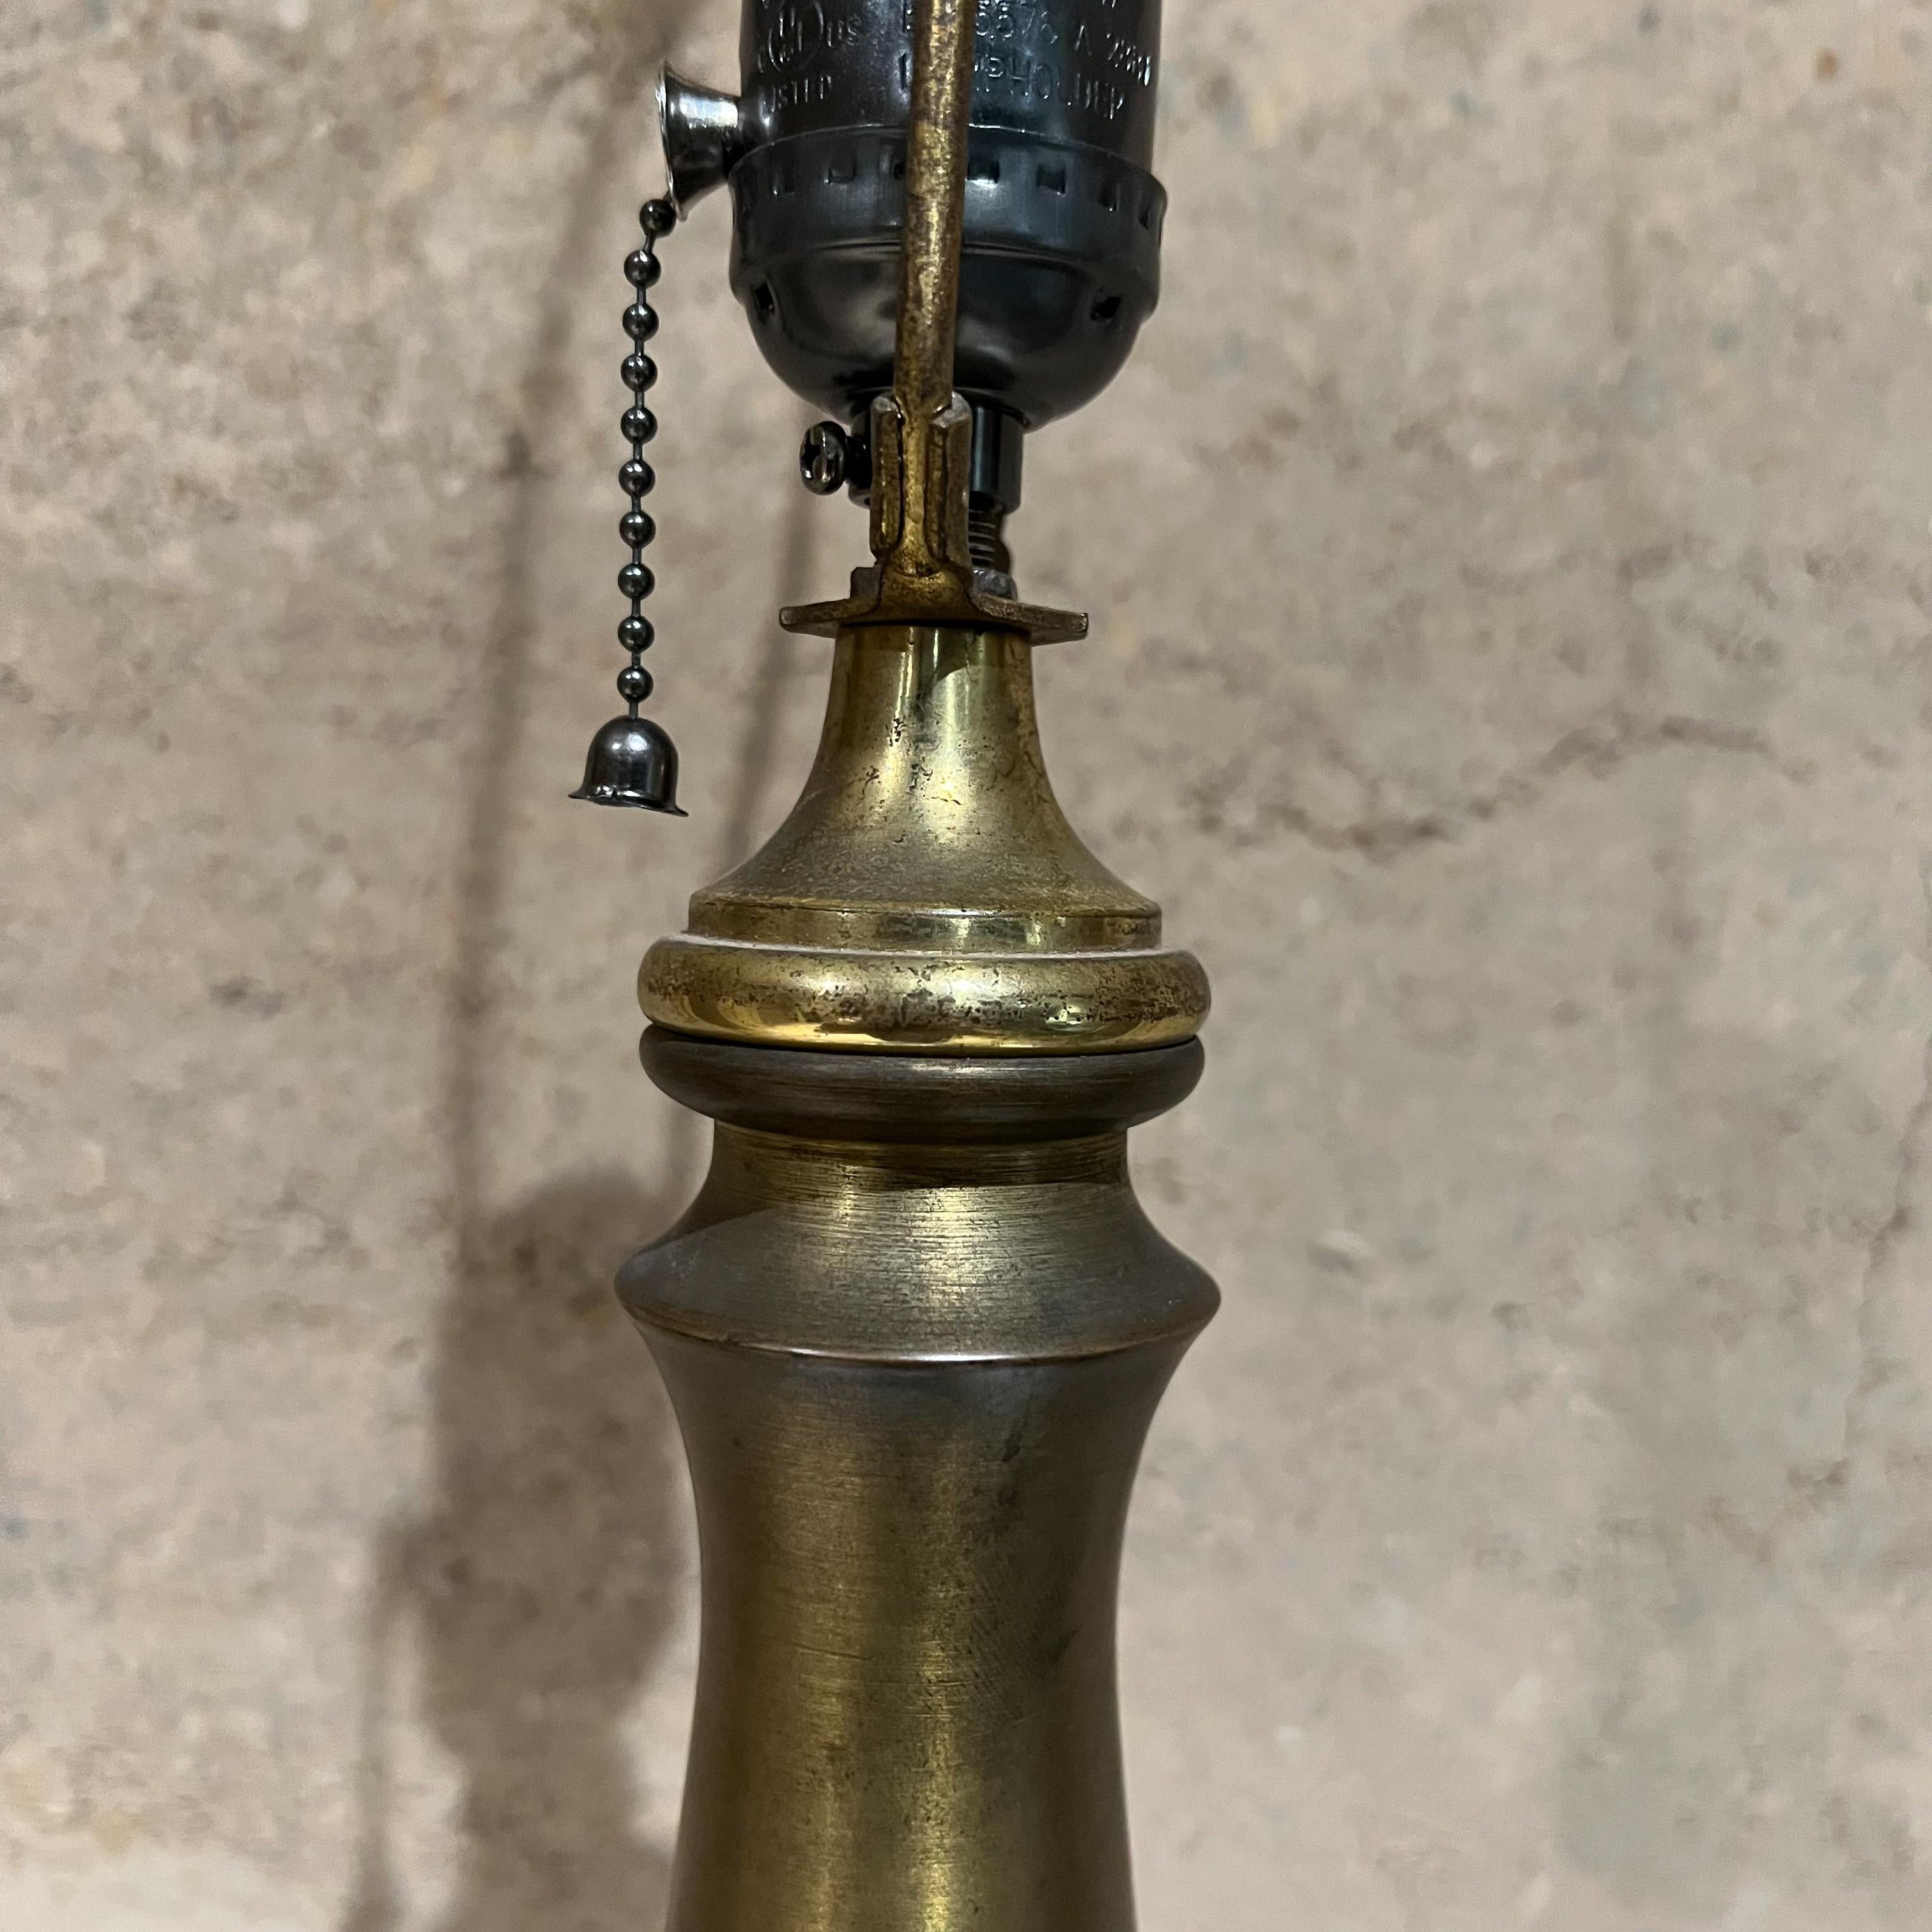 1950s Arturo Pani Regency Tall Table Lamp Forged Iron Patinated Brass Mexico  In Good Condition For Sale In Chula Vista, CA